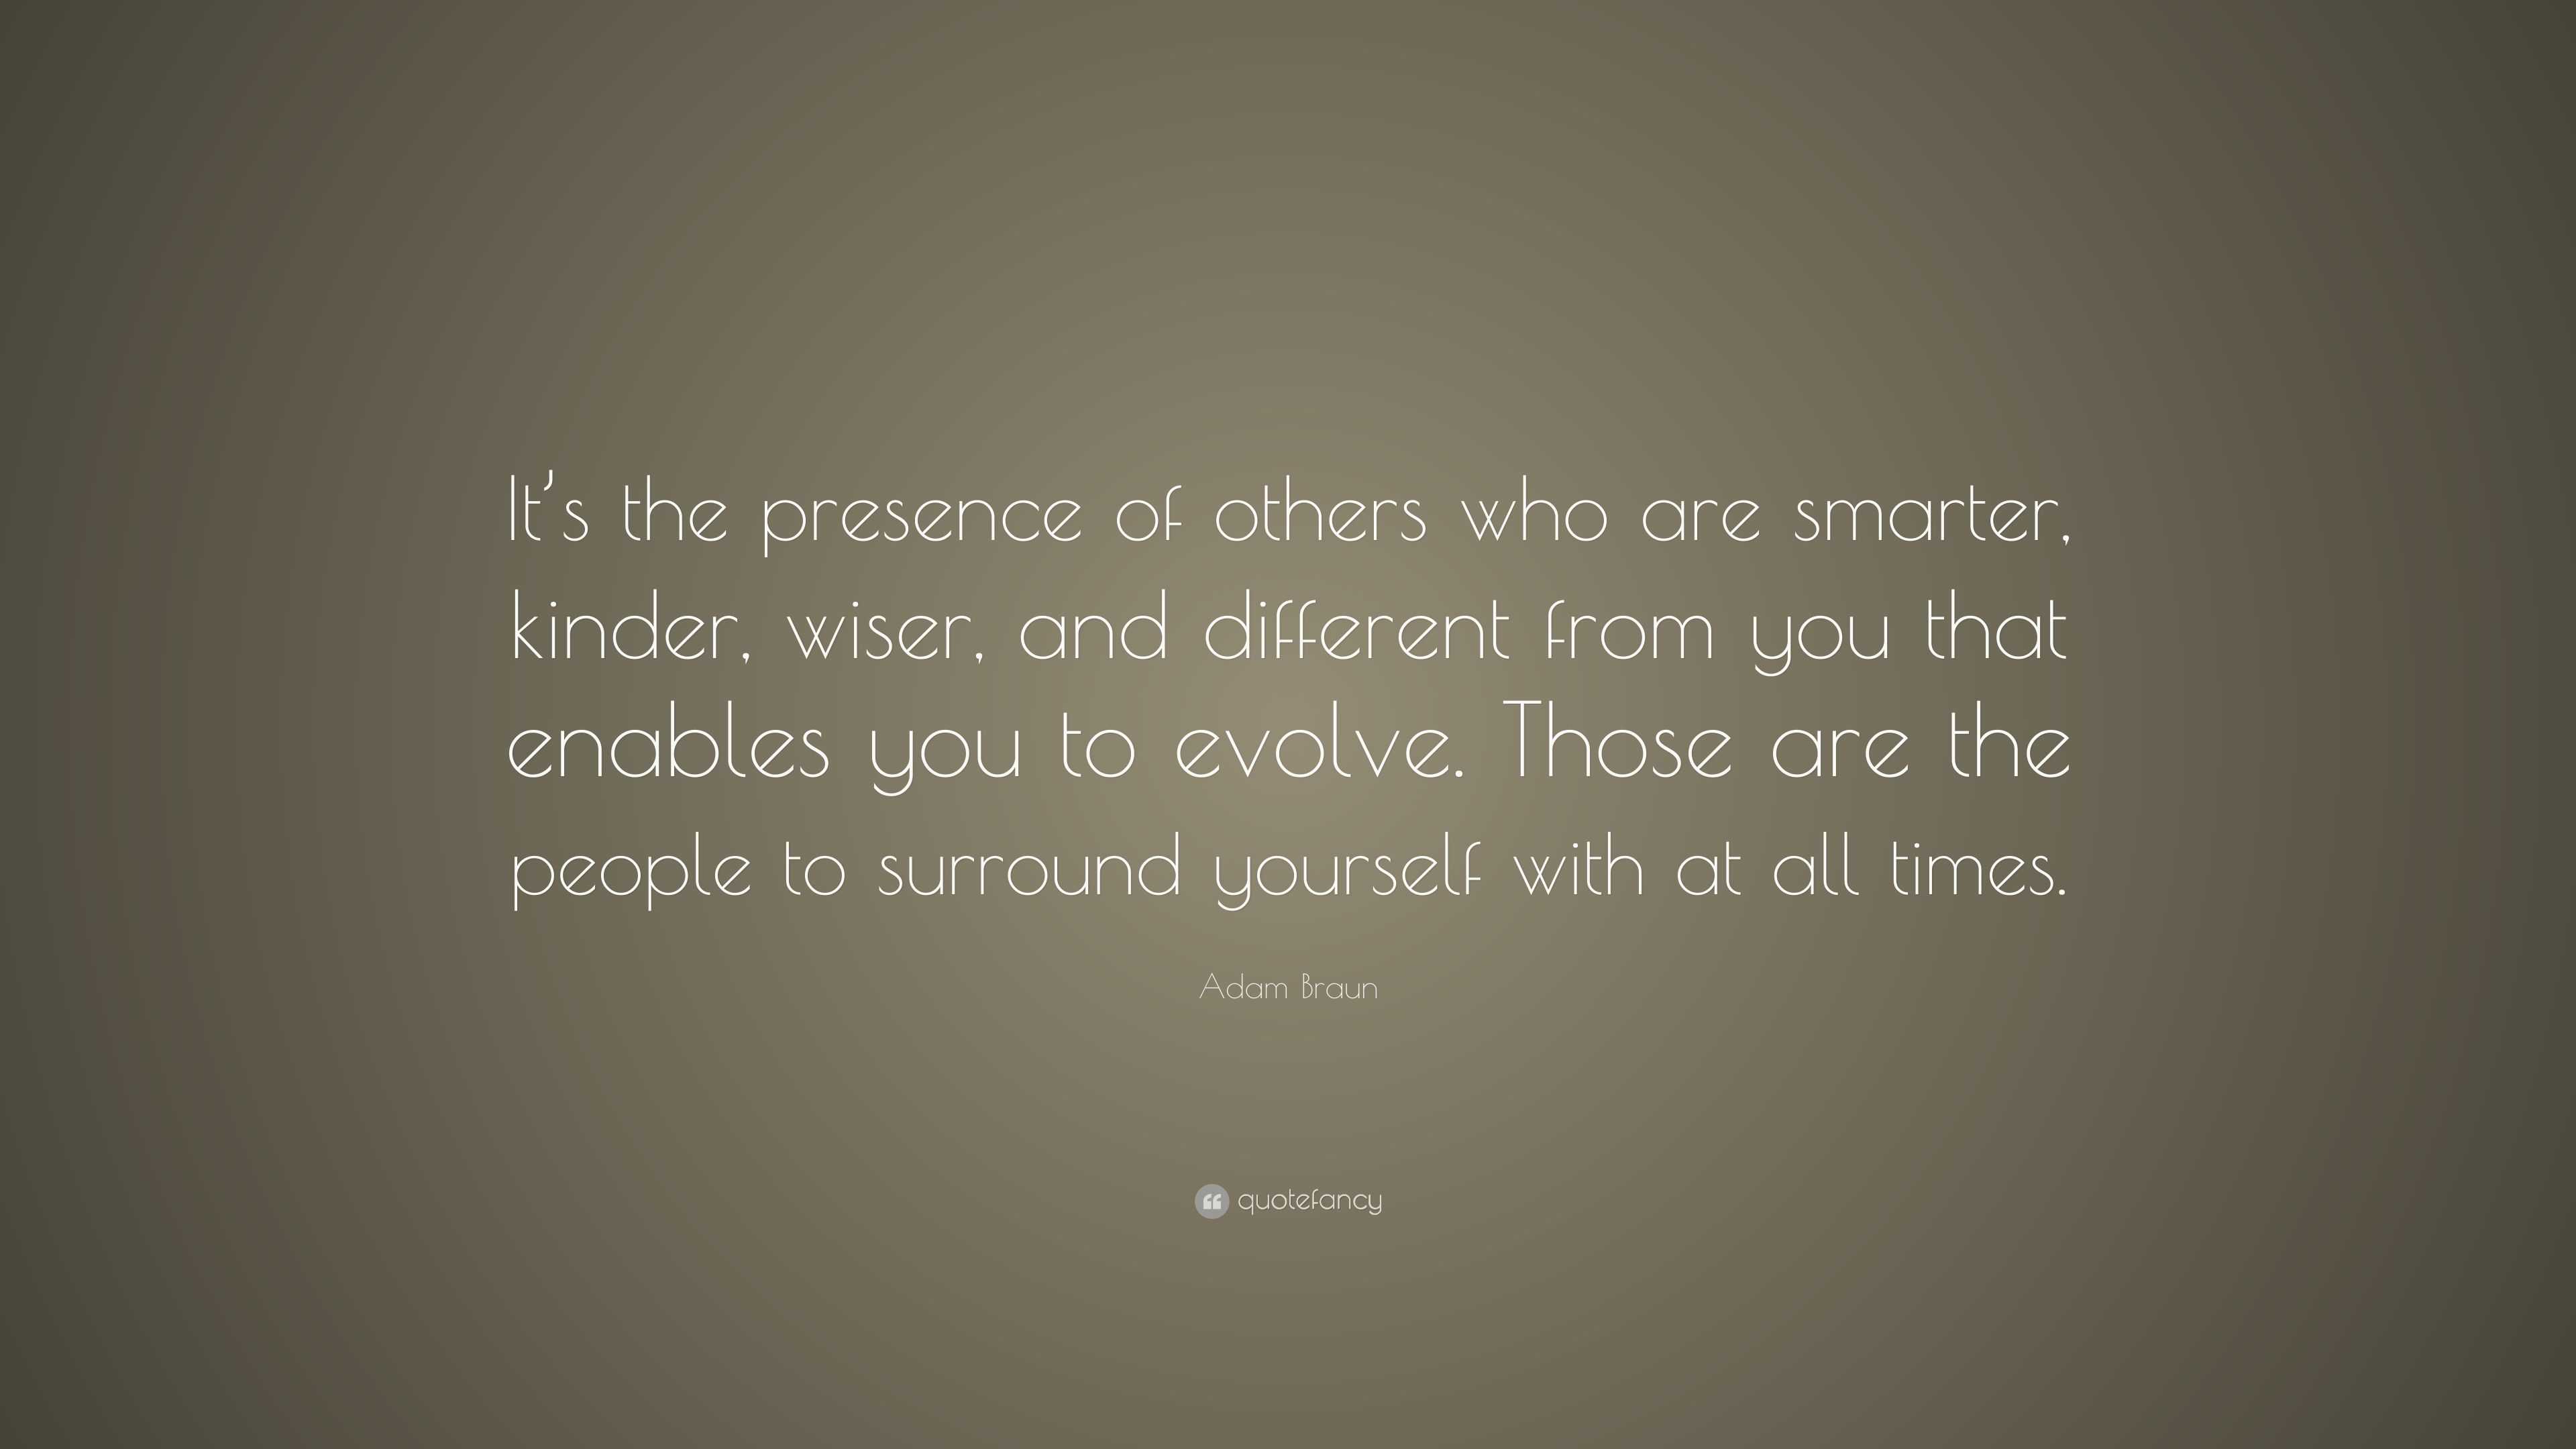 Adam Braun Quote: “It’s the presence of others who are smarter, kinder ...